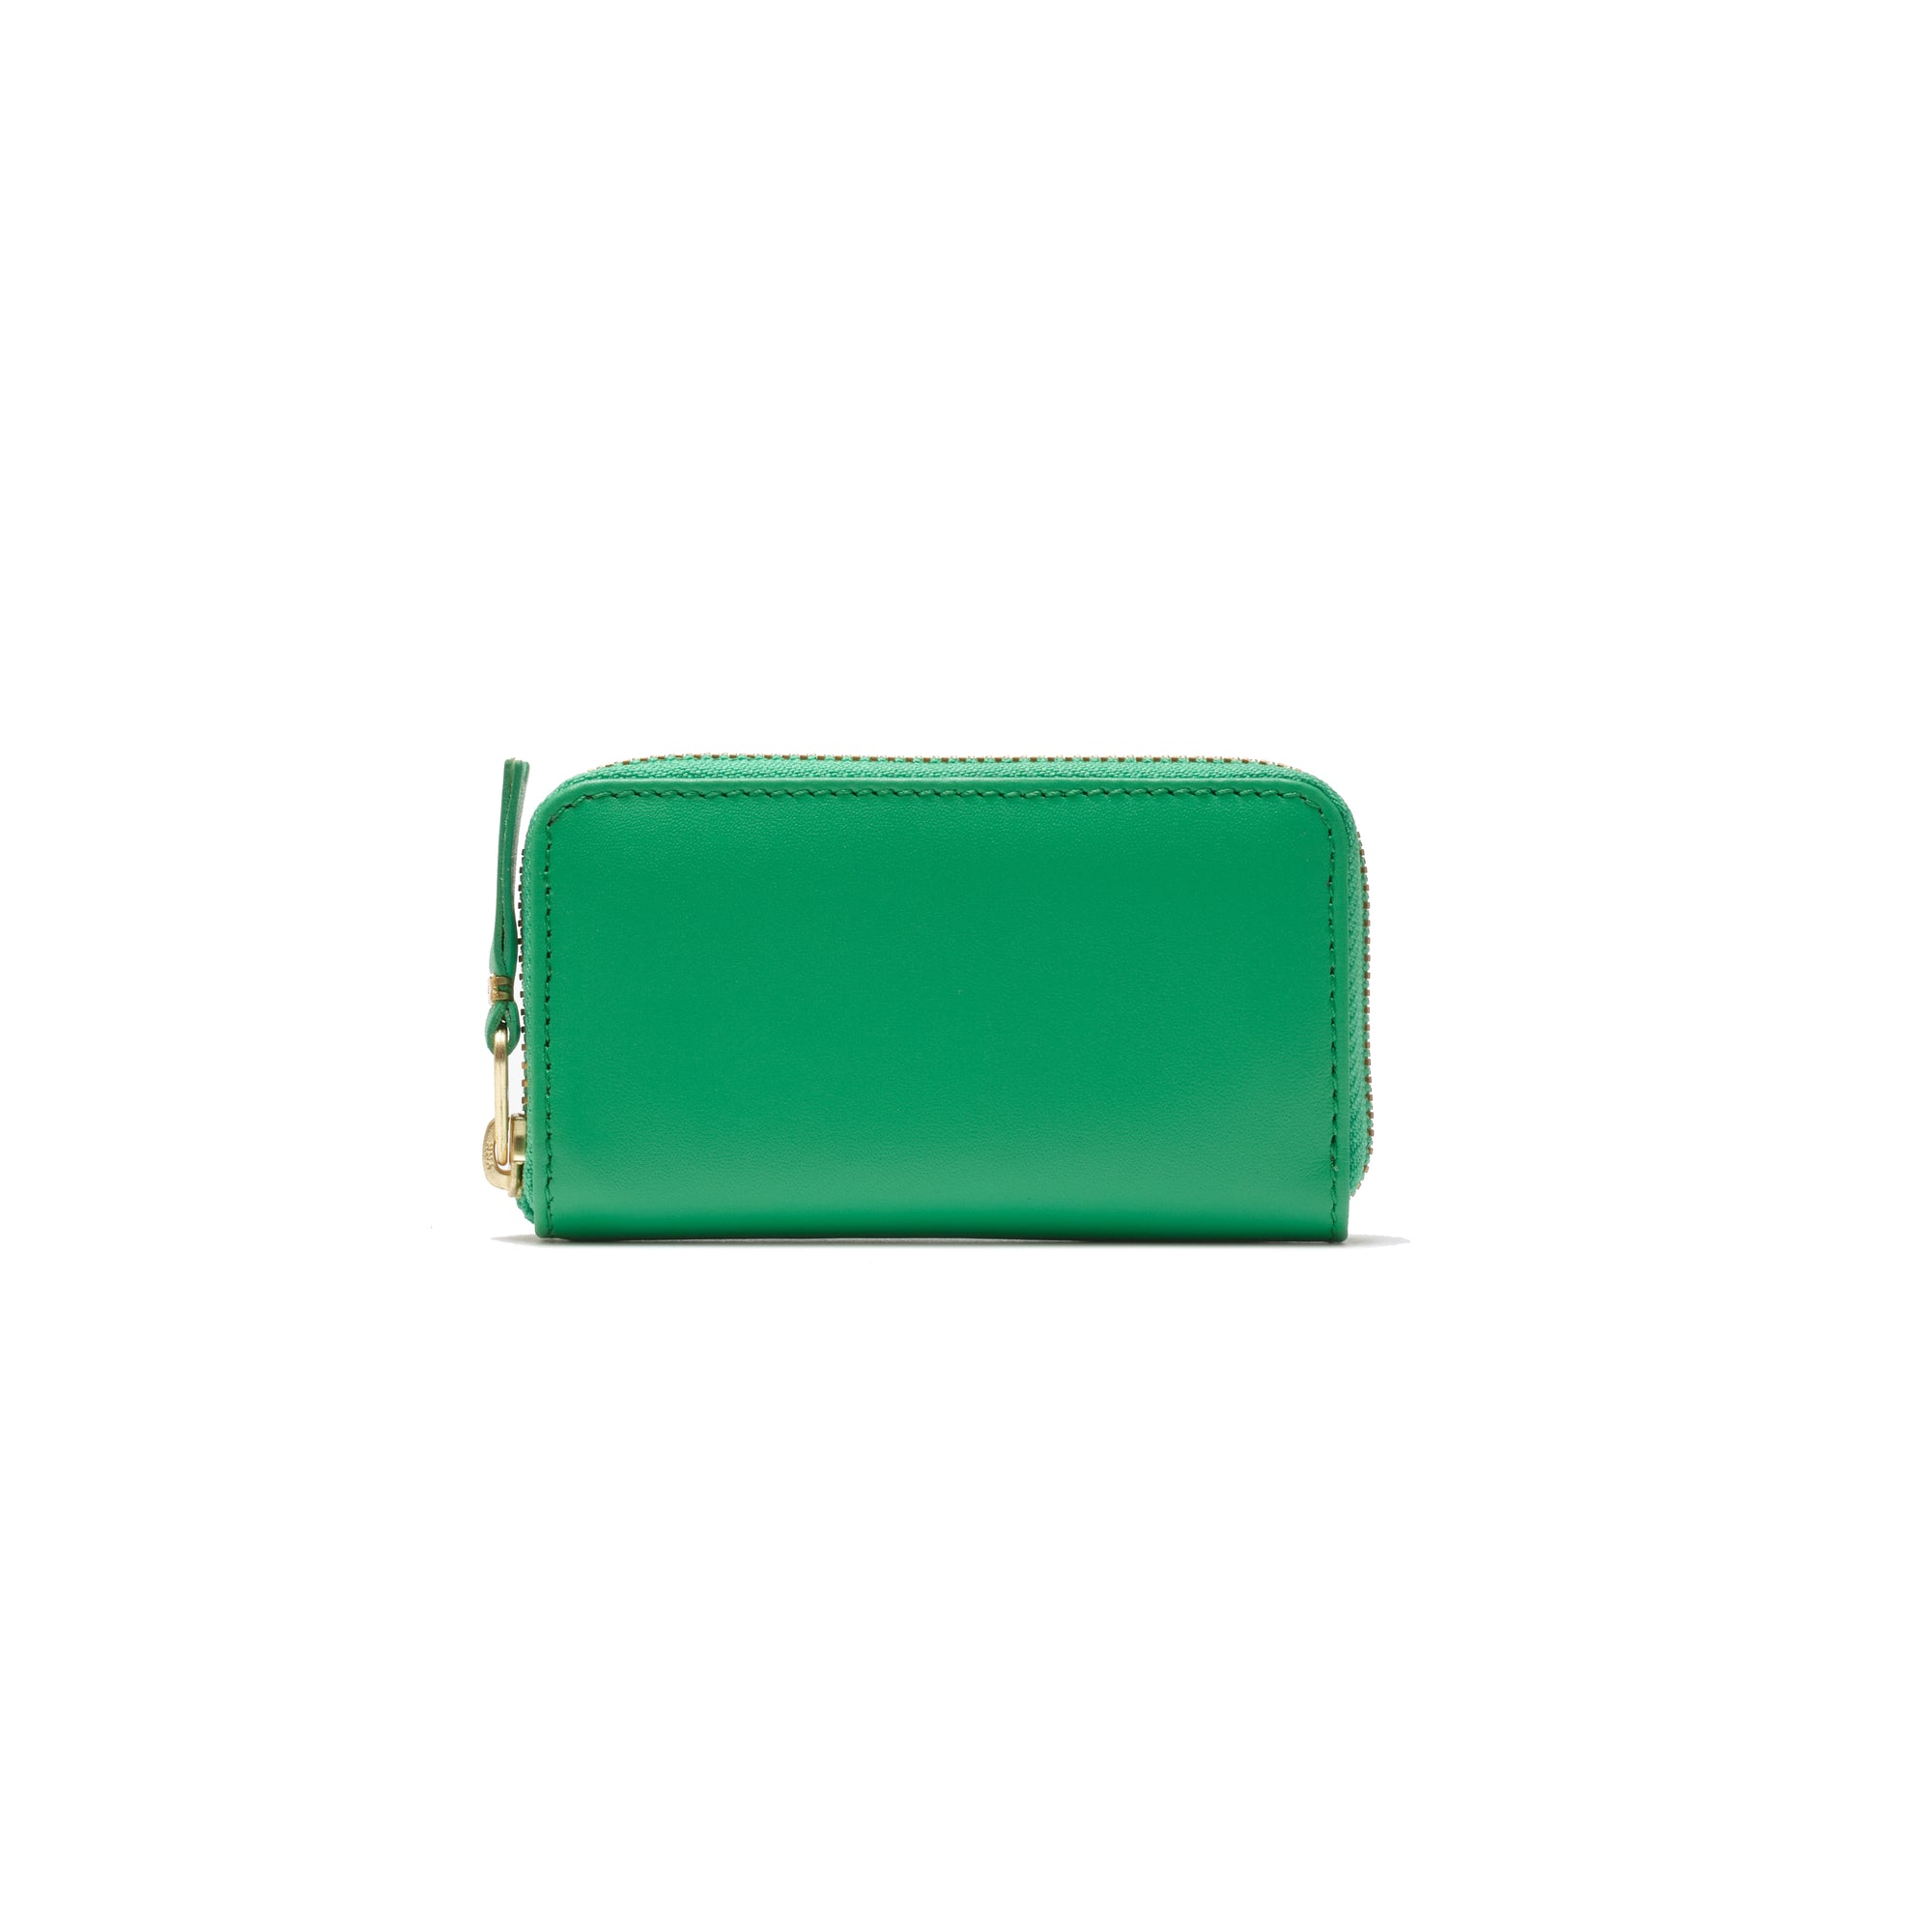 CDG WALLET - Colored Leather Line-8Z-A004 - (Green) view 1